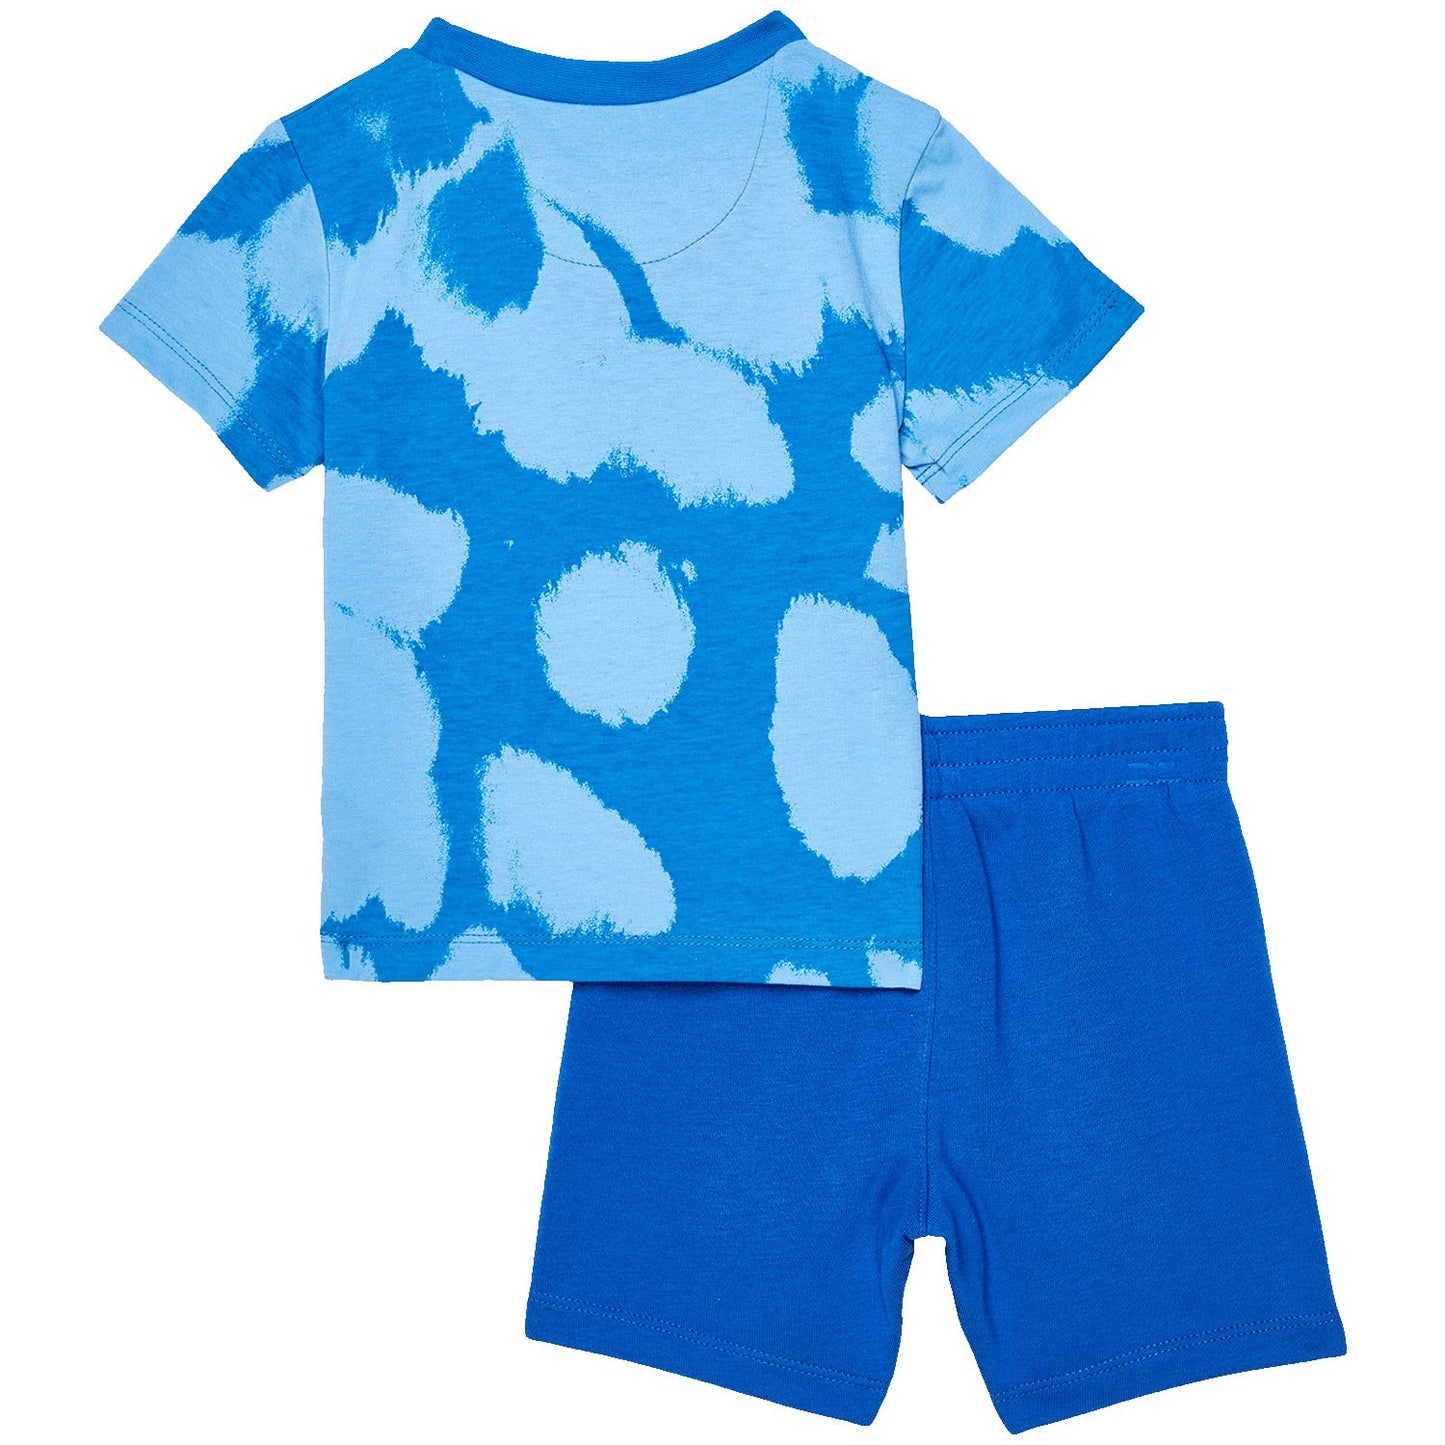 Image 2 of Dot-Dye T-Shirt and French Terry Shorts Set (Infant)